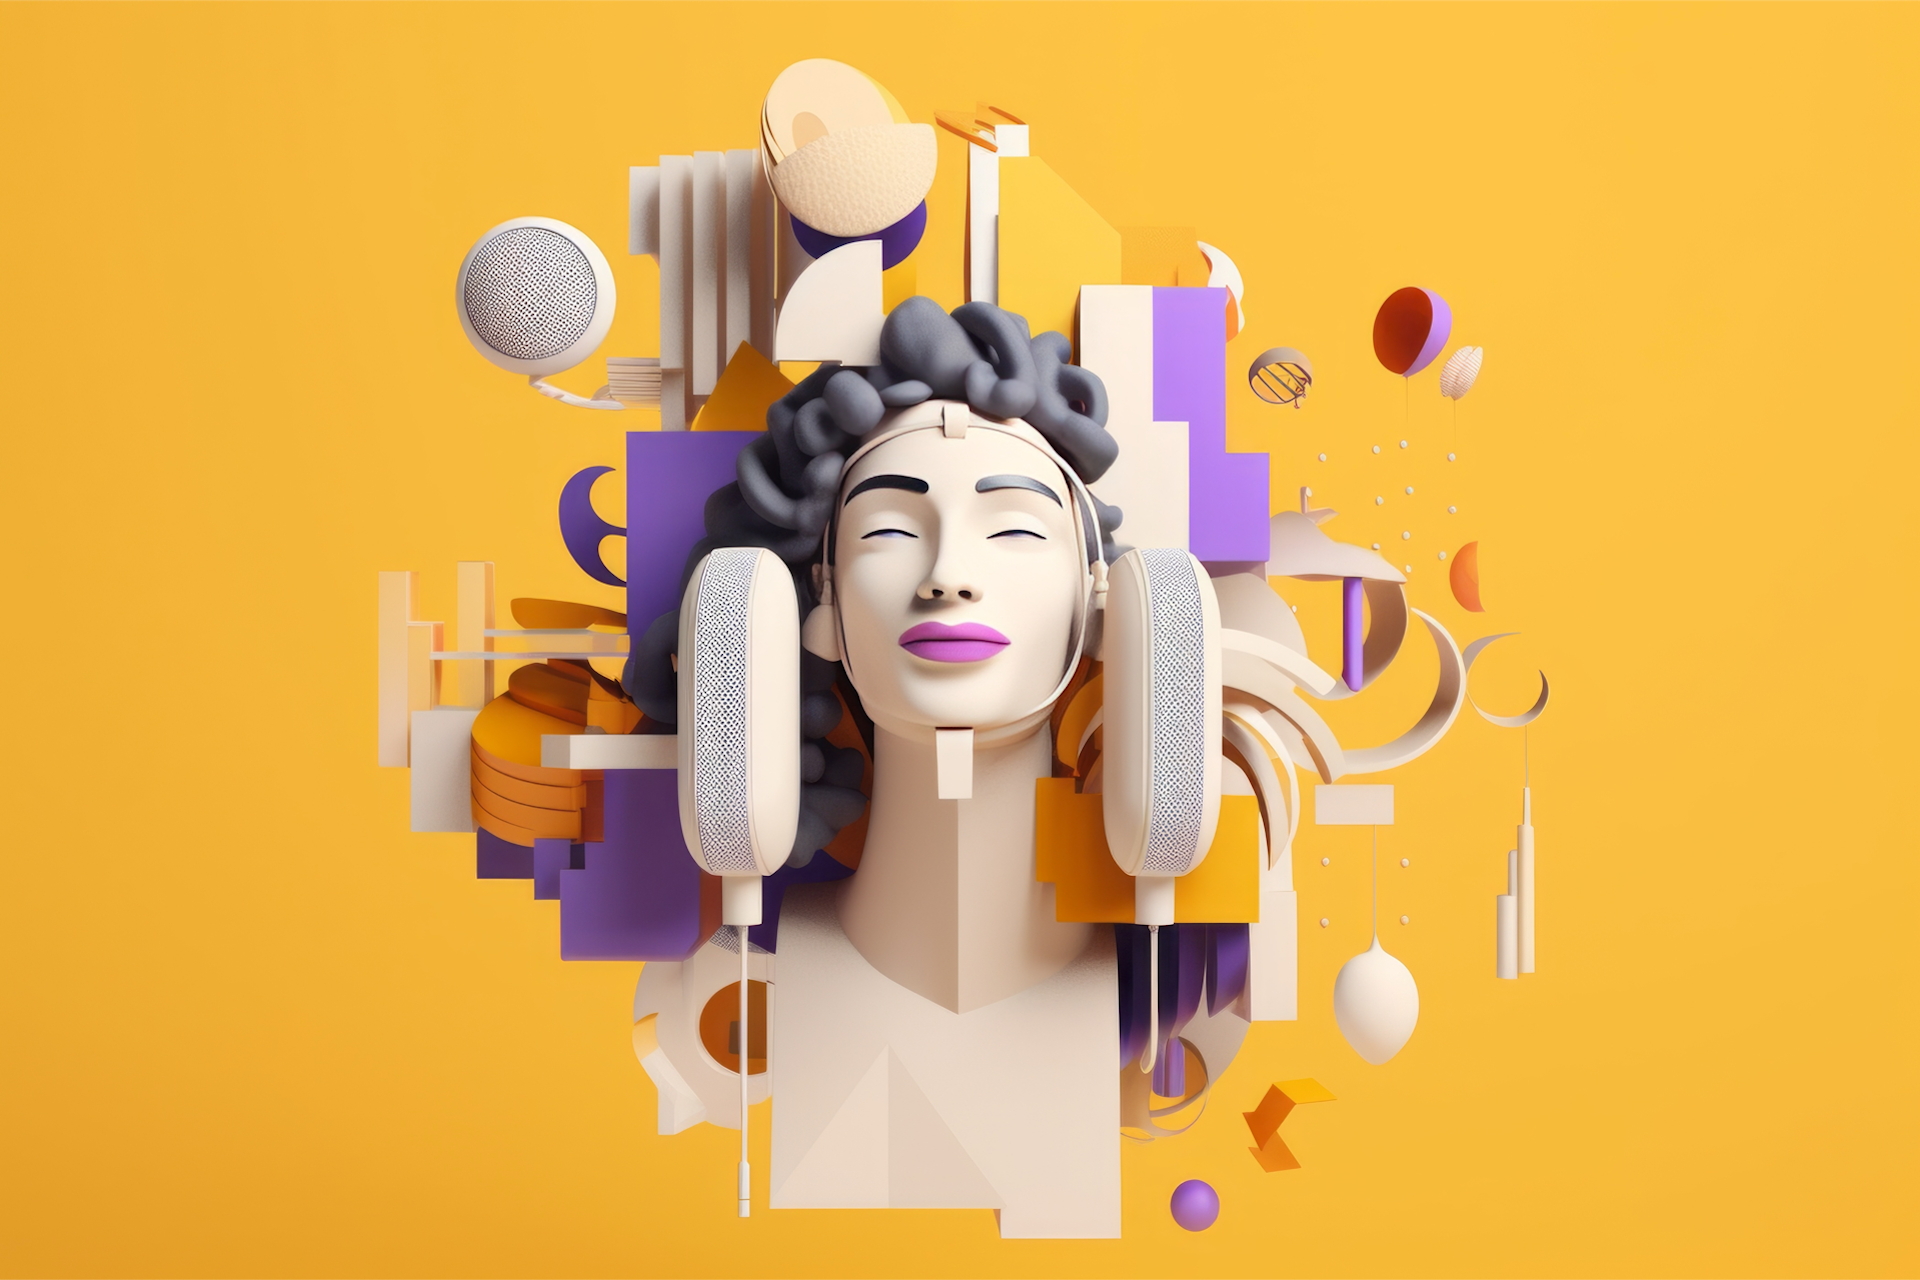 An illustration of a woman's face surrounded by abstract imagery. 